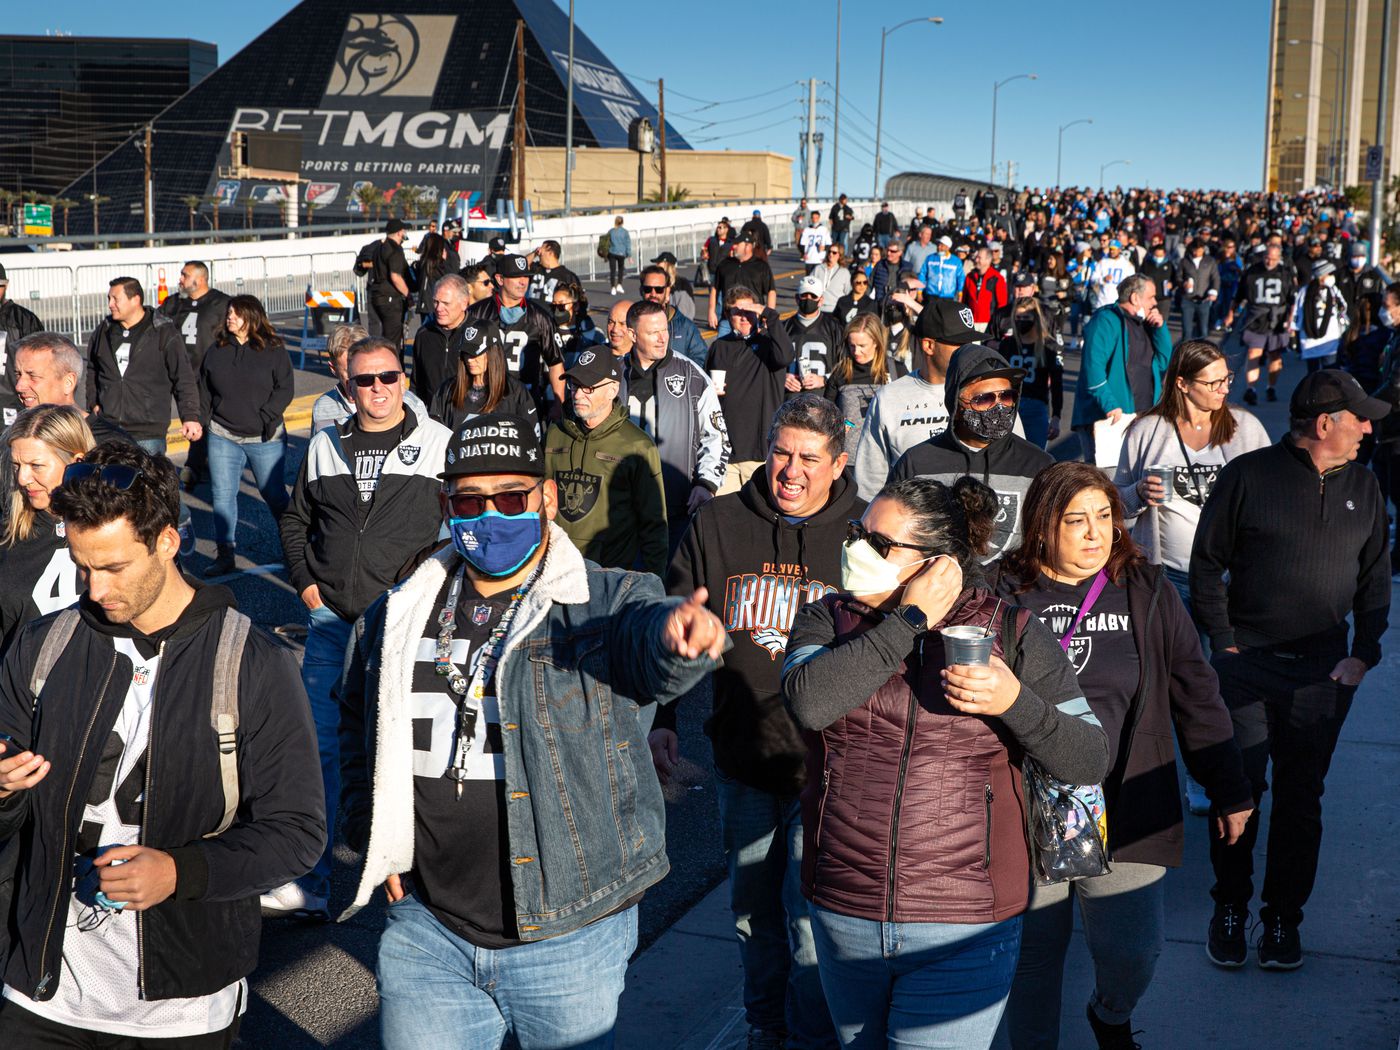 Raiders news: Fans are among NFL's best trash talkers - Silver And